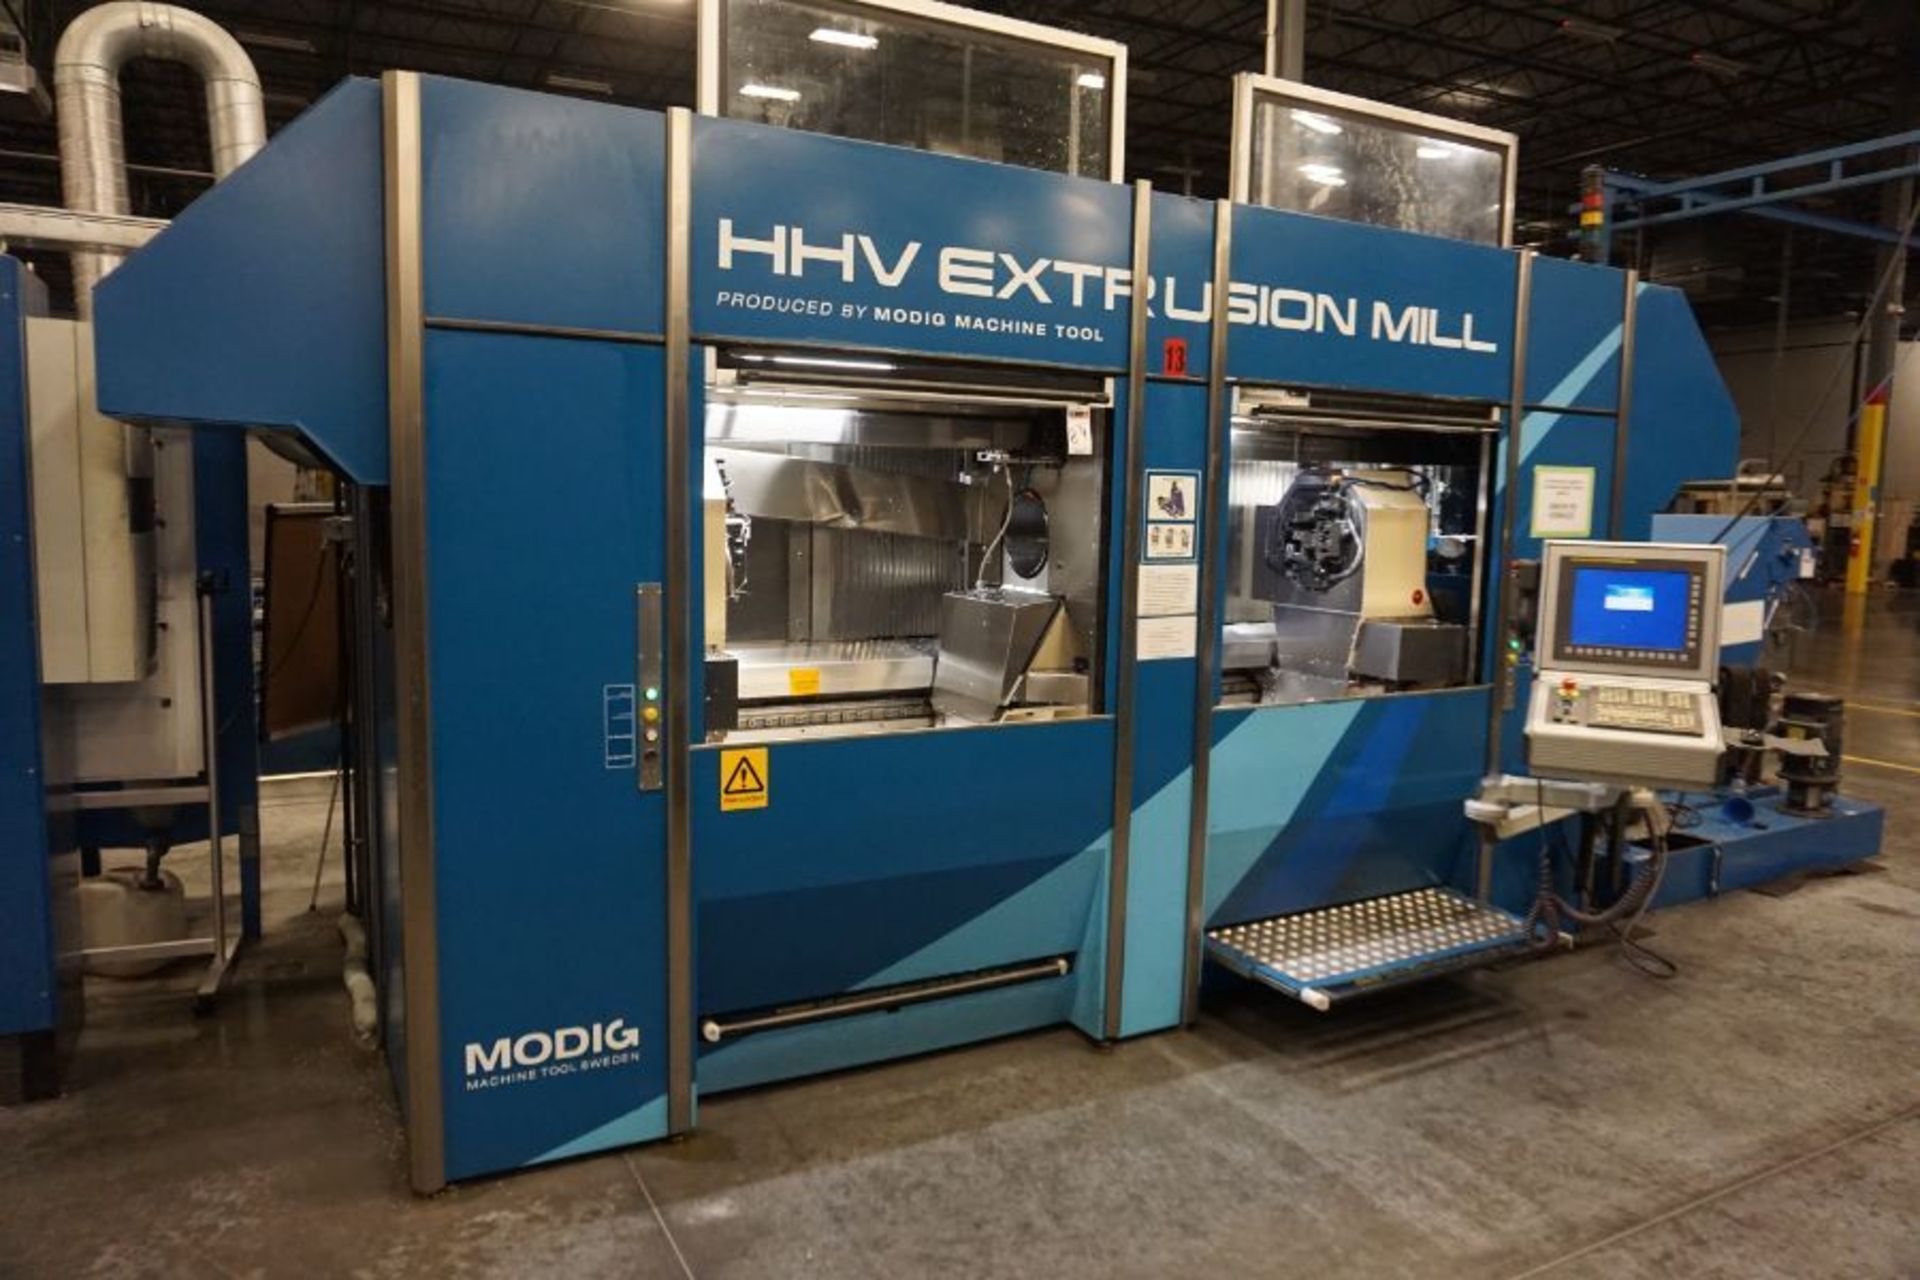 2014, Modig HHV 4-Axis High Speed Extrusion Mill, Fanuc 30i Model B, Fischer 1700 MM 30K Spindle - Image 3 of 9